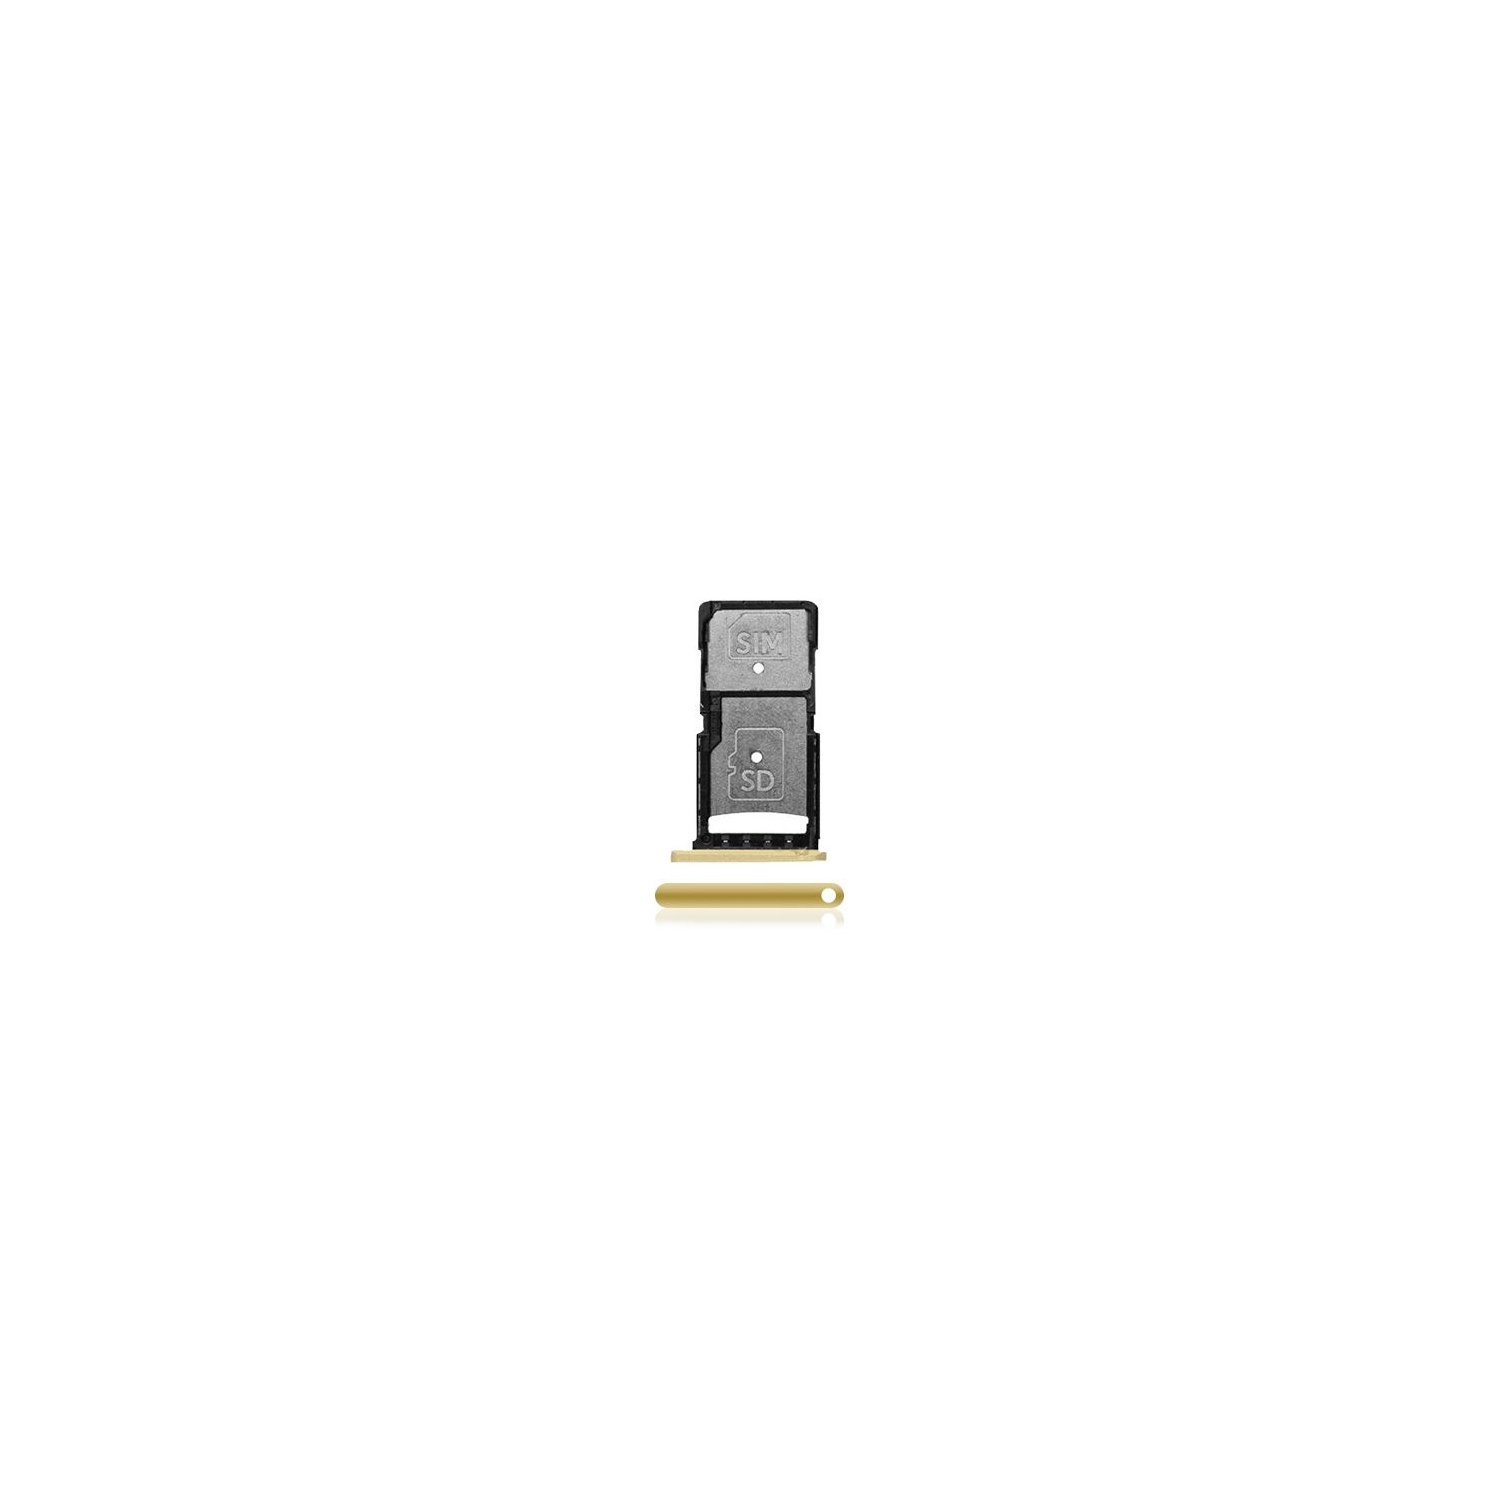 Replacement Sim Card Tray Compatible For Motorola Droid Turbo 2 (XT1585 / XT1580 / XT1581 / 2015) (Gold)